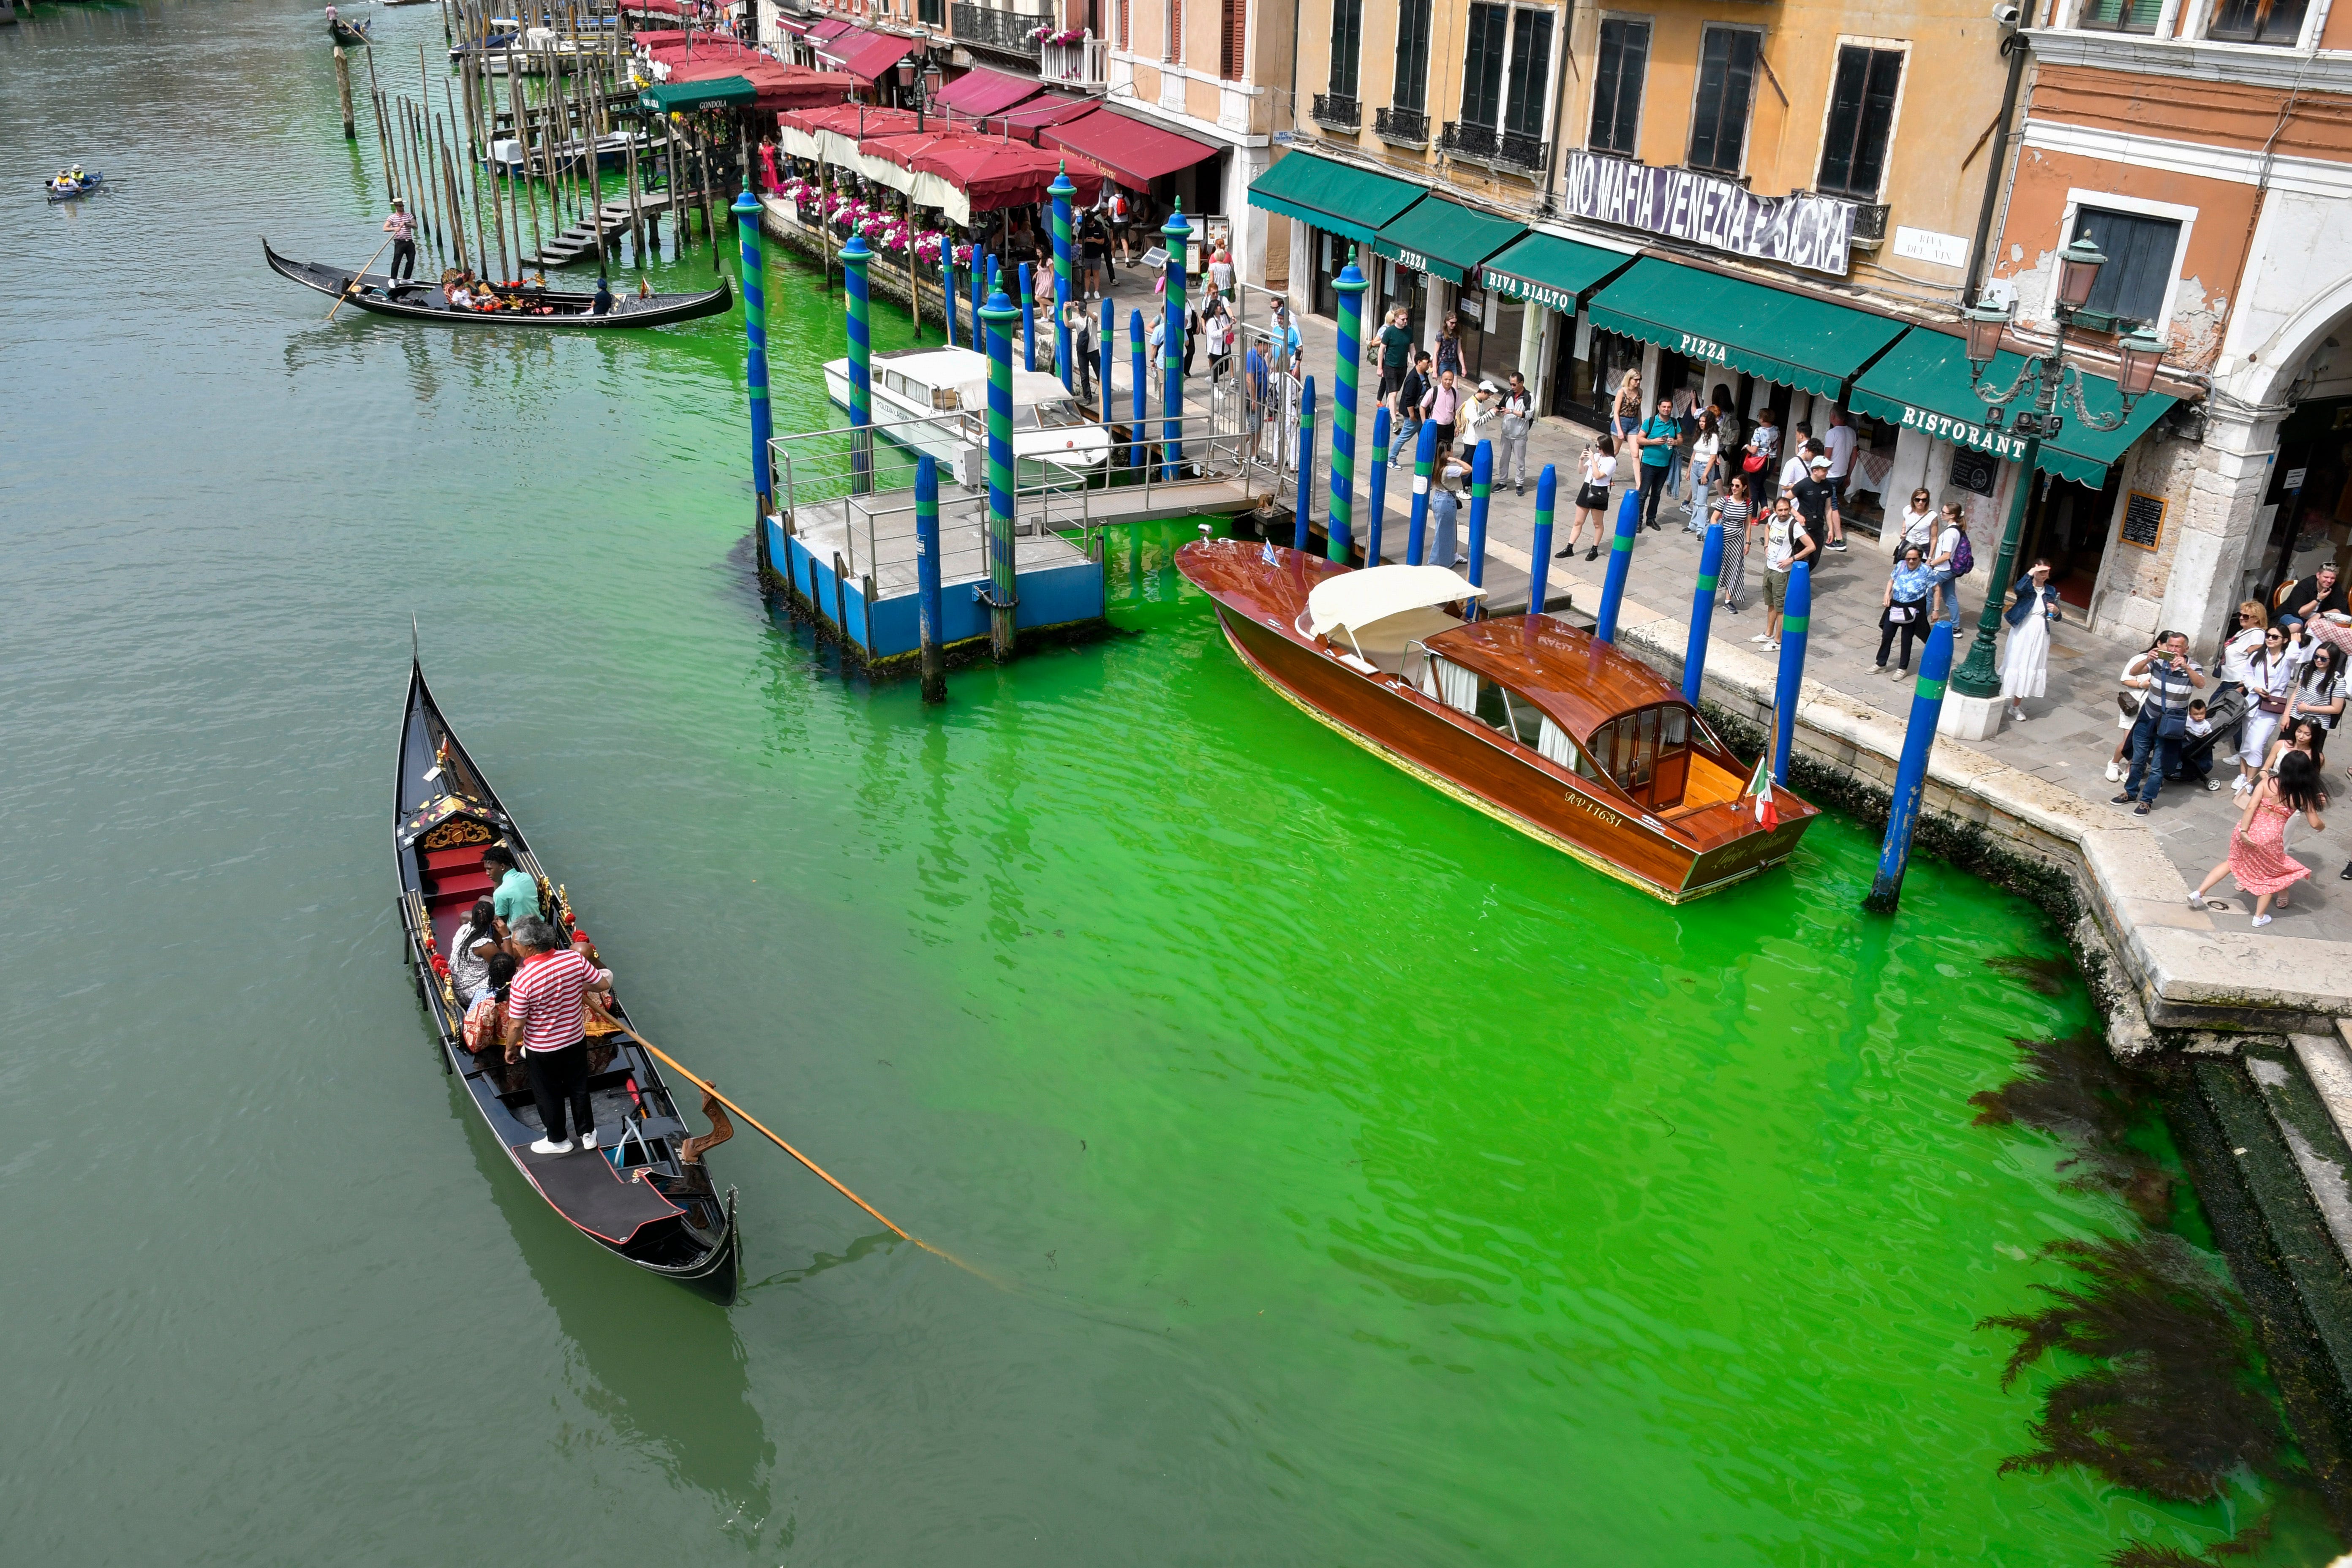 What turned Venice's Grand Canal green over the weekend? Authorities identify substance